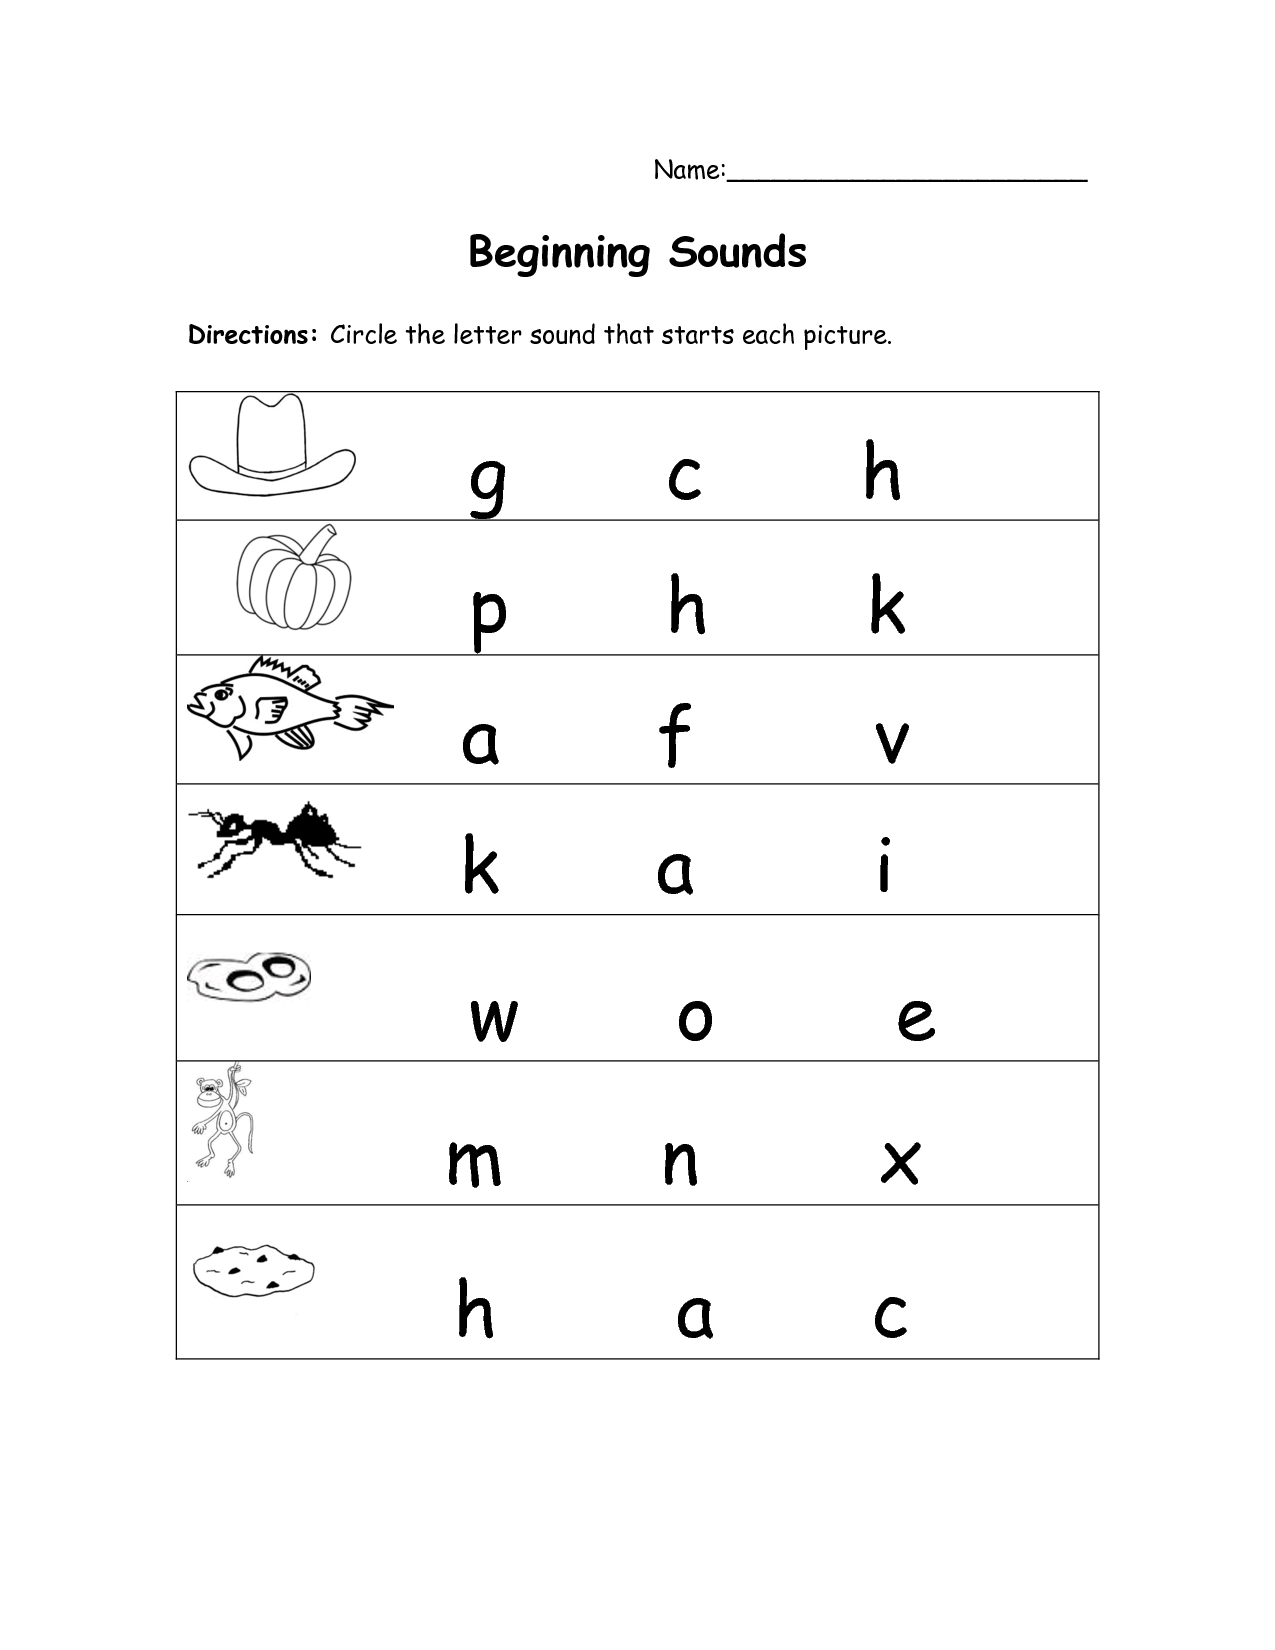 13 Best Images of Beginning And Ending Sounds Printable ...